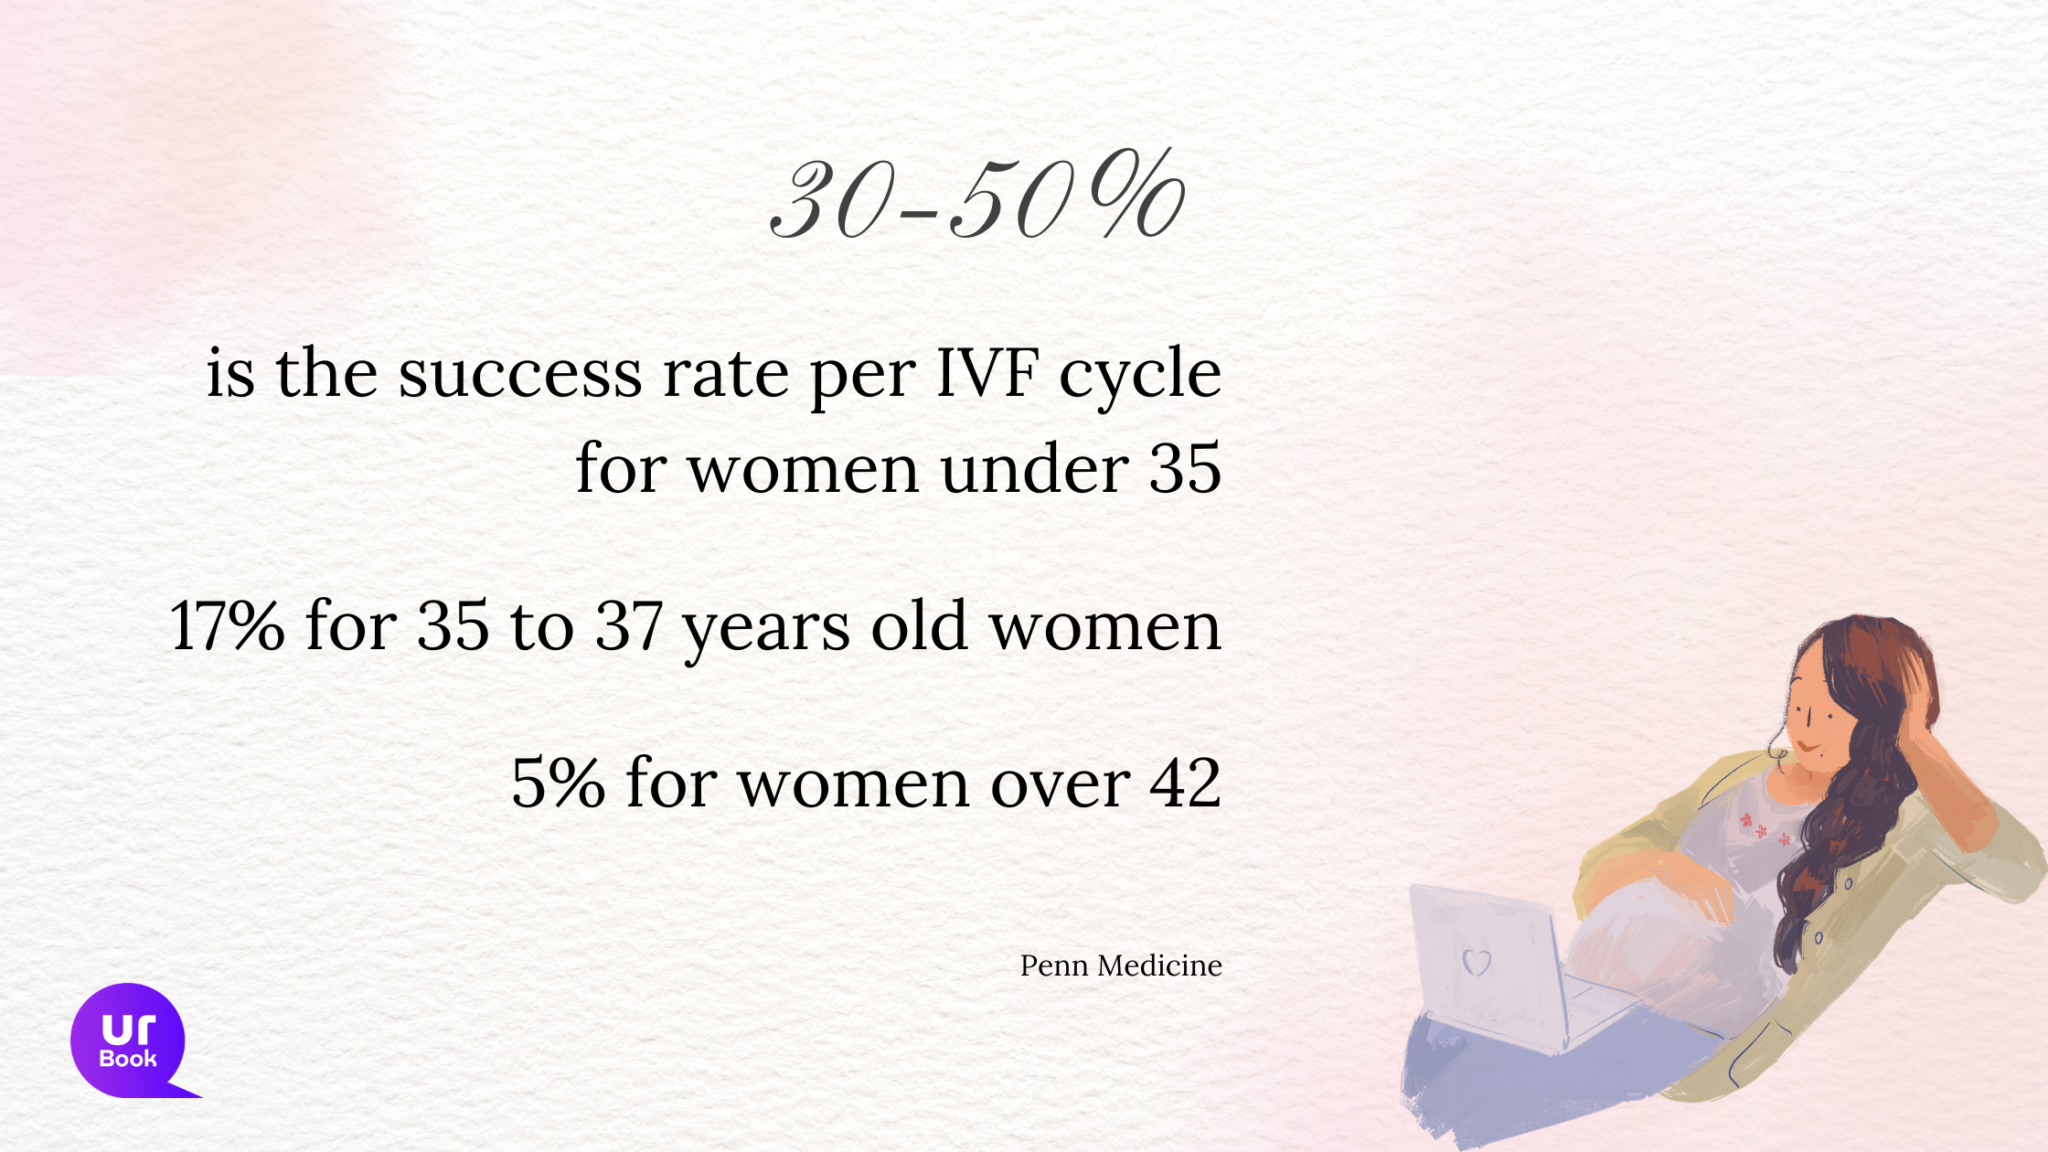 Ivf cycle for women under 35